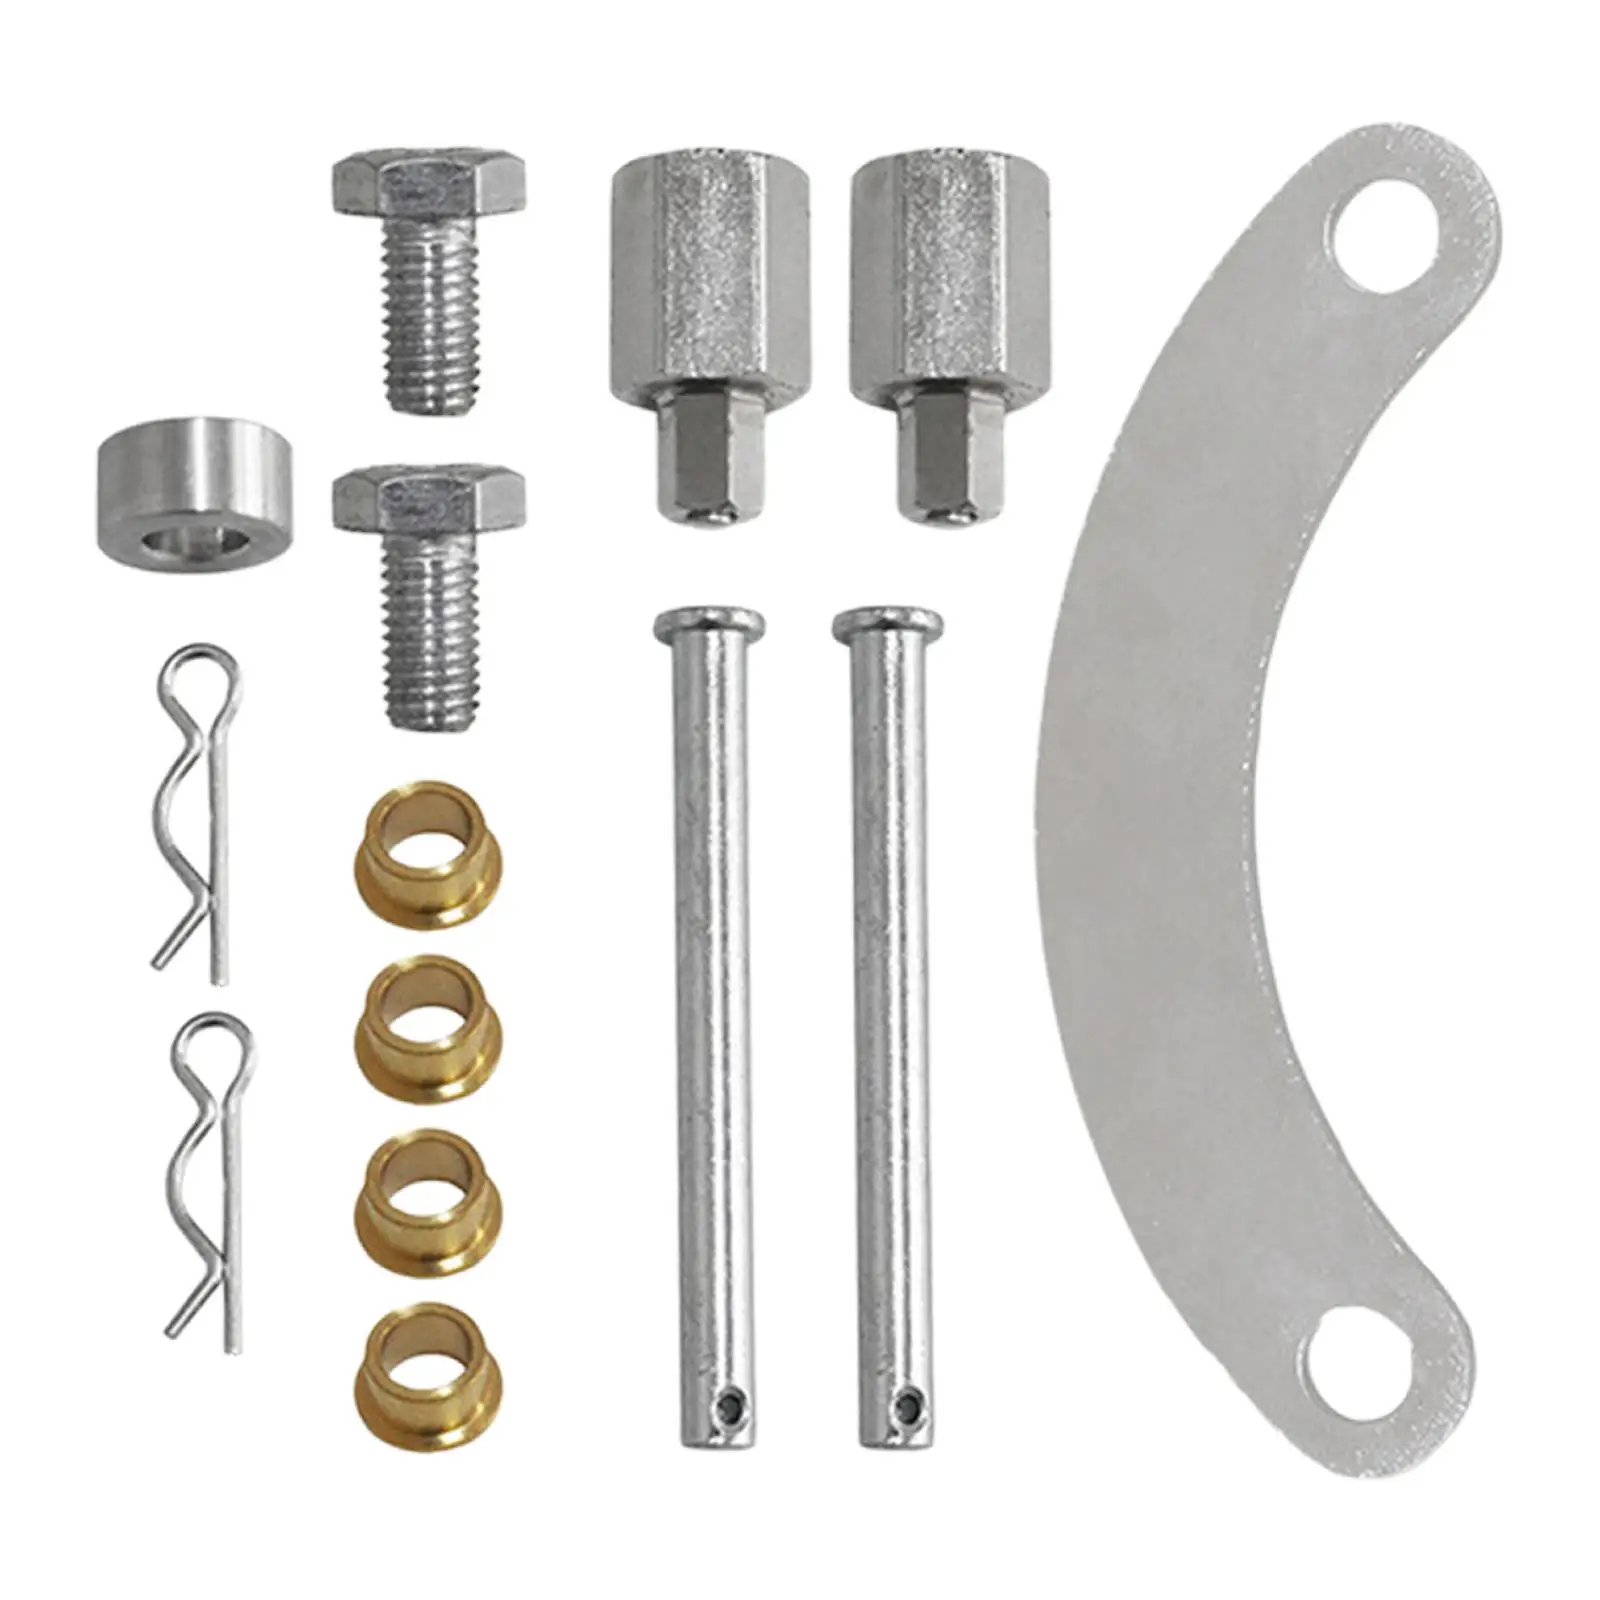 cam Gear Lock set Direct Replaces for Dohc Easy to Install Repair